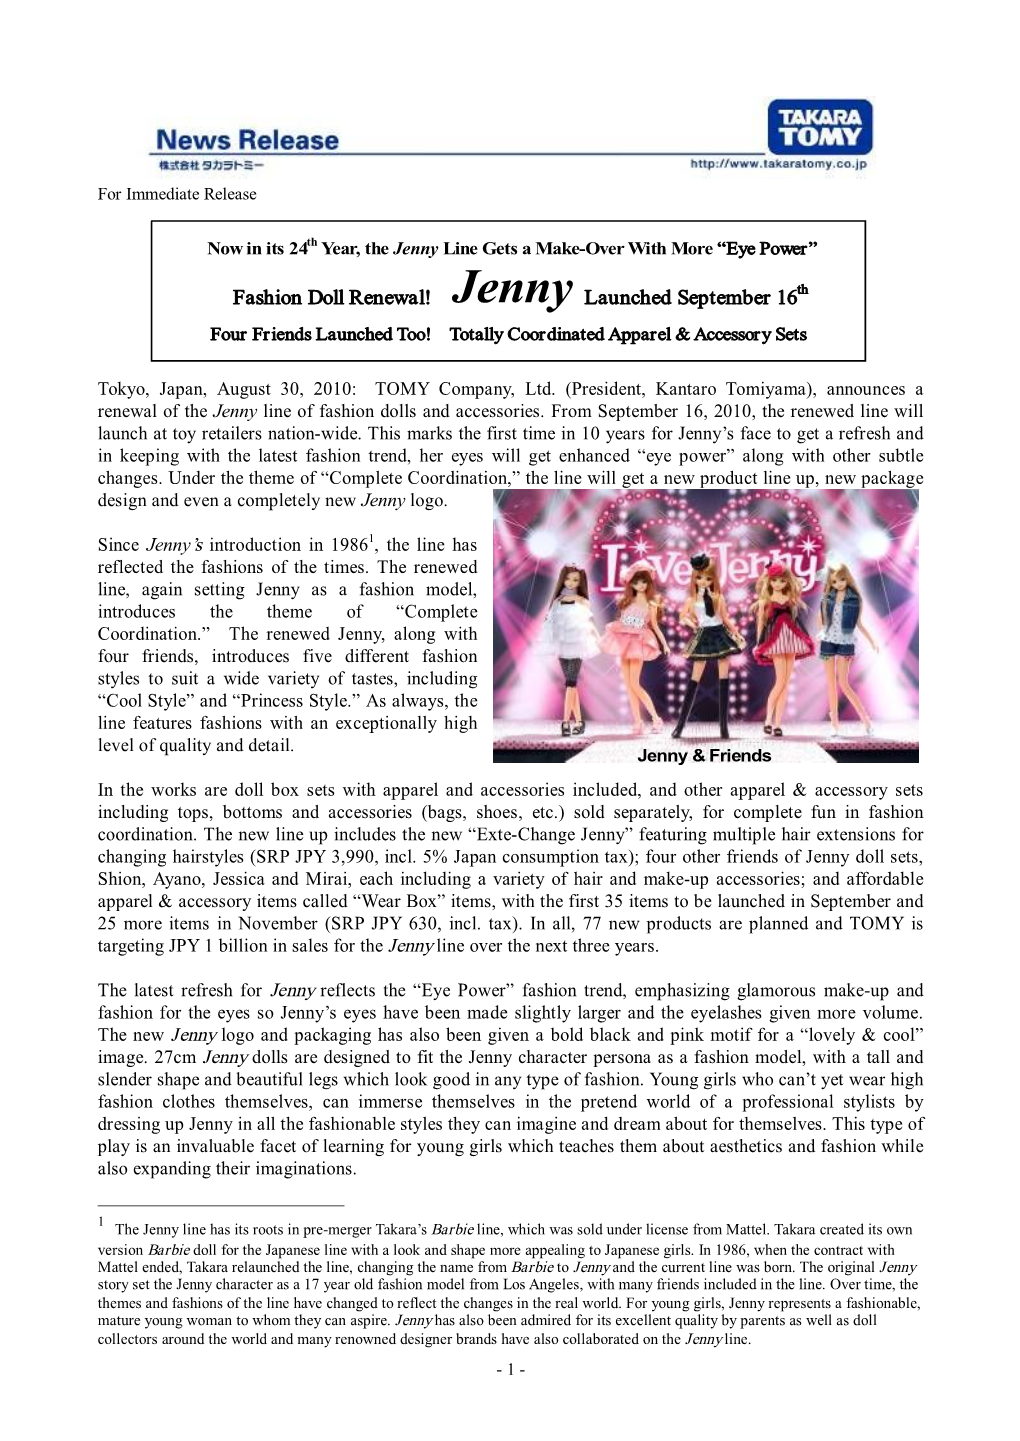 Fashion Doll Renewal! Jenny Launched September 16Th